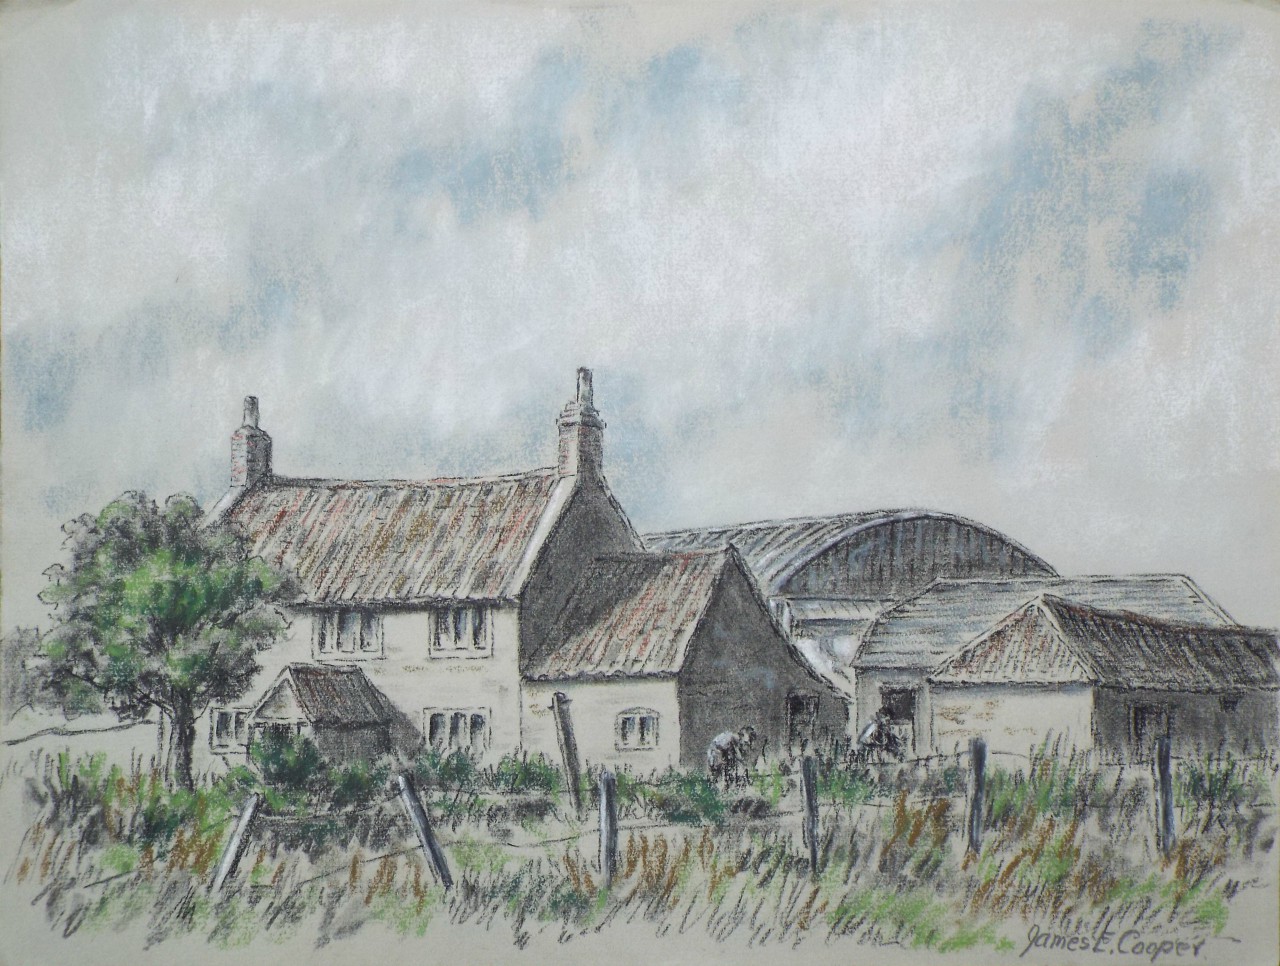 Watercolour and Pastel - A Farm in the Mendips Coleford